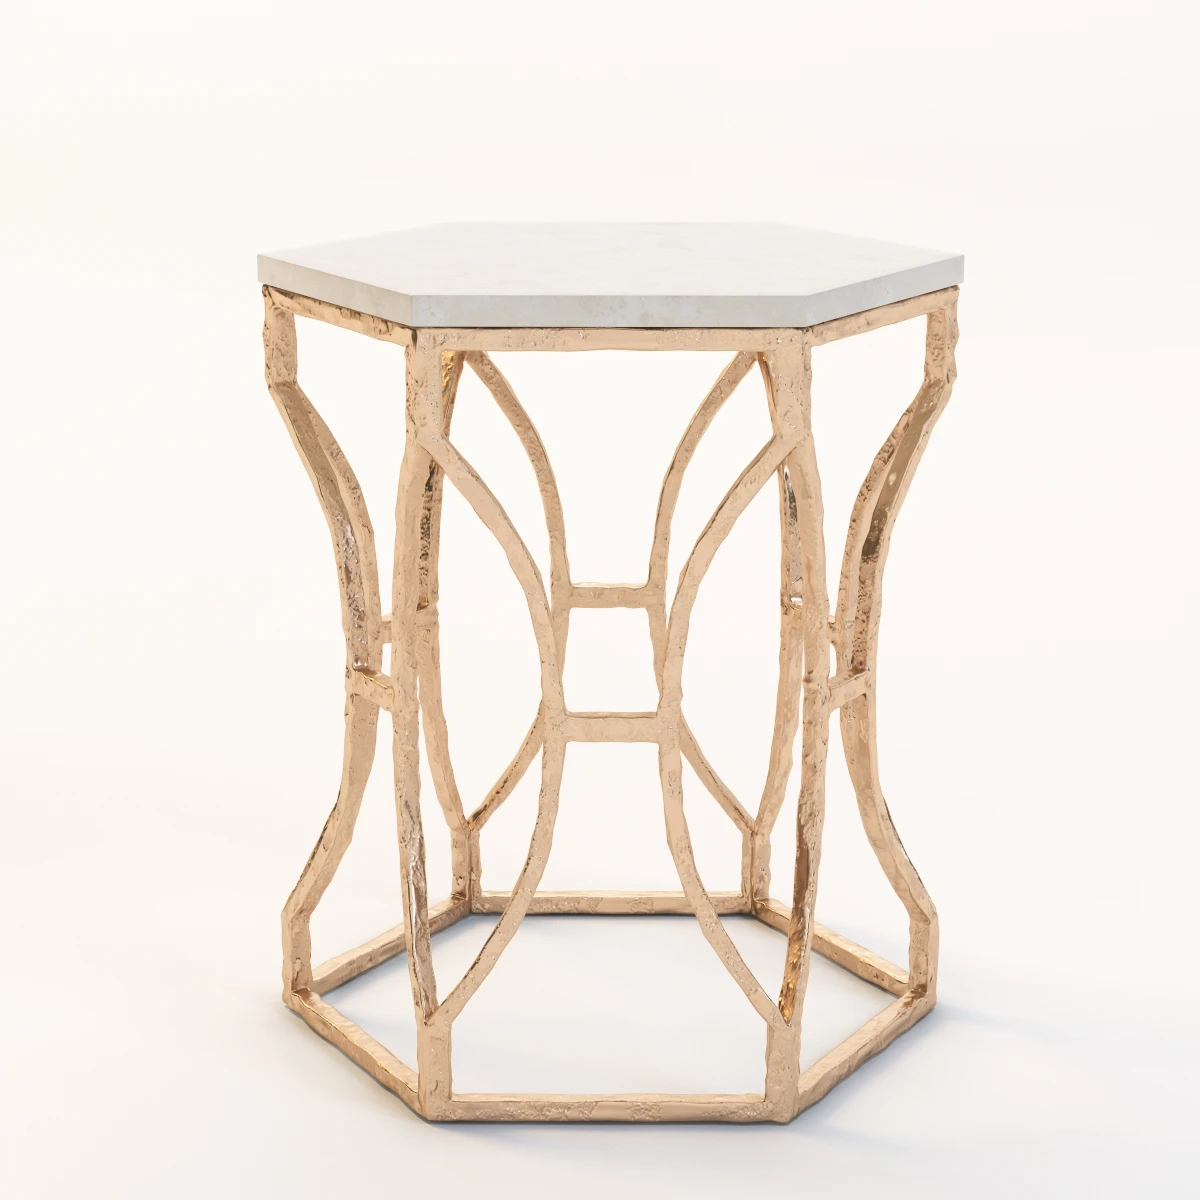 Roja Antique Gold Leaf Cream Marble Hexagonal Side Table 3D Model_06